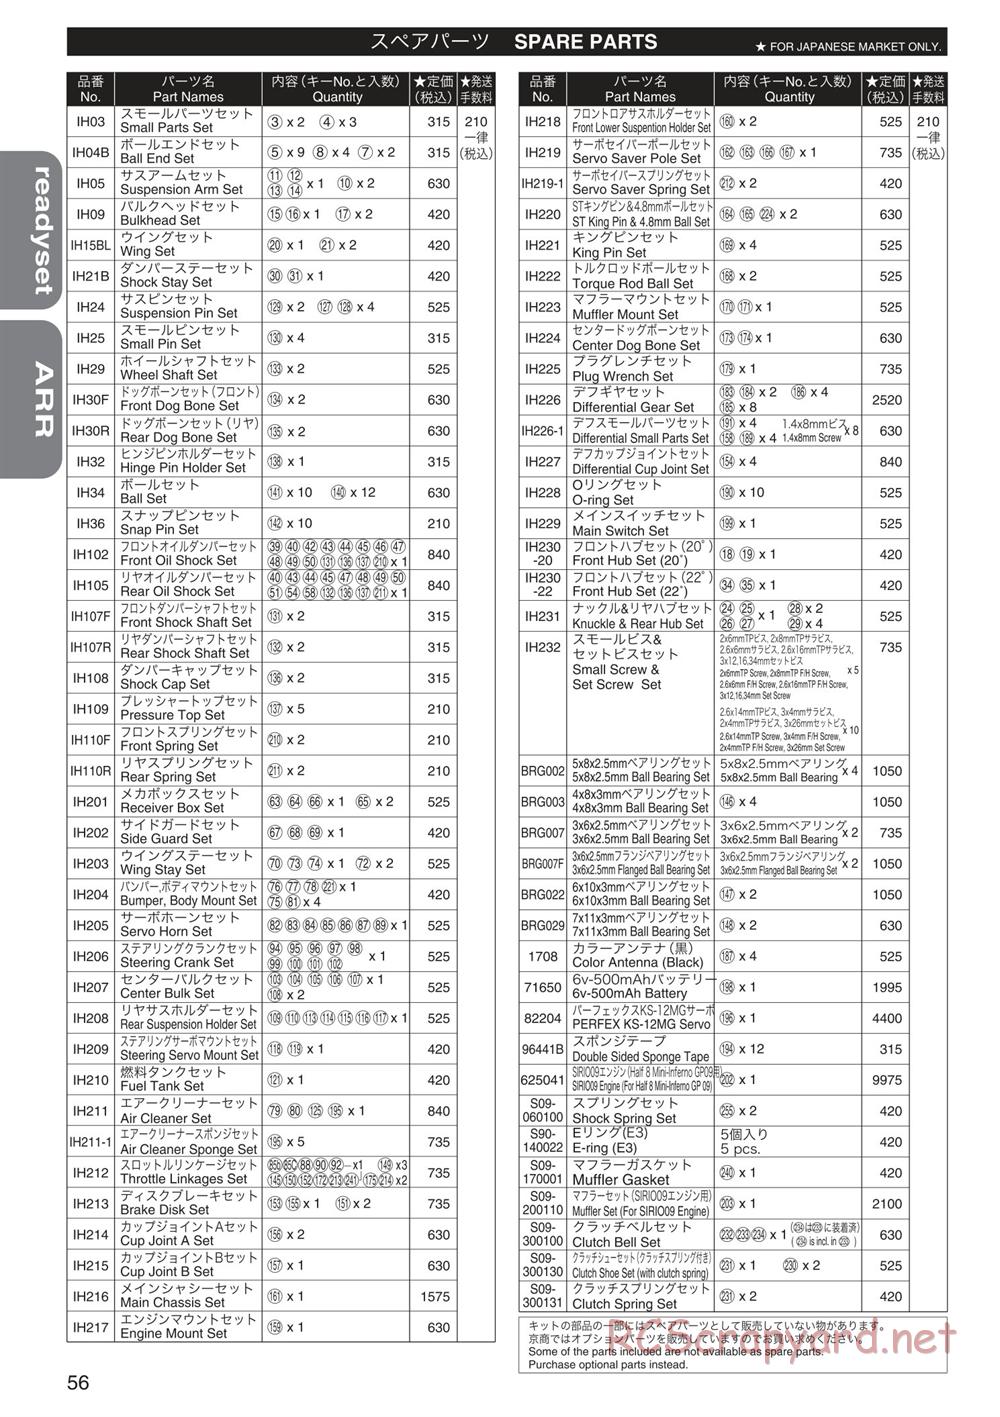 Kyosho - Mini Inferno 09 - Parts List - Page 1